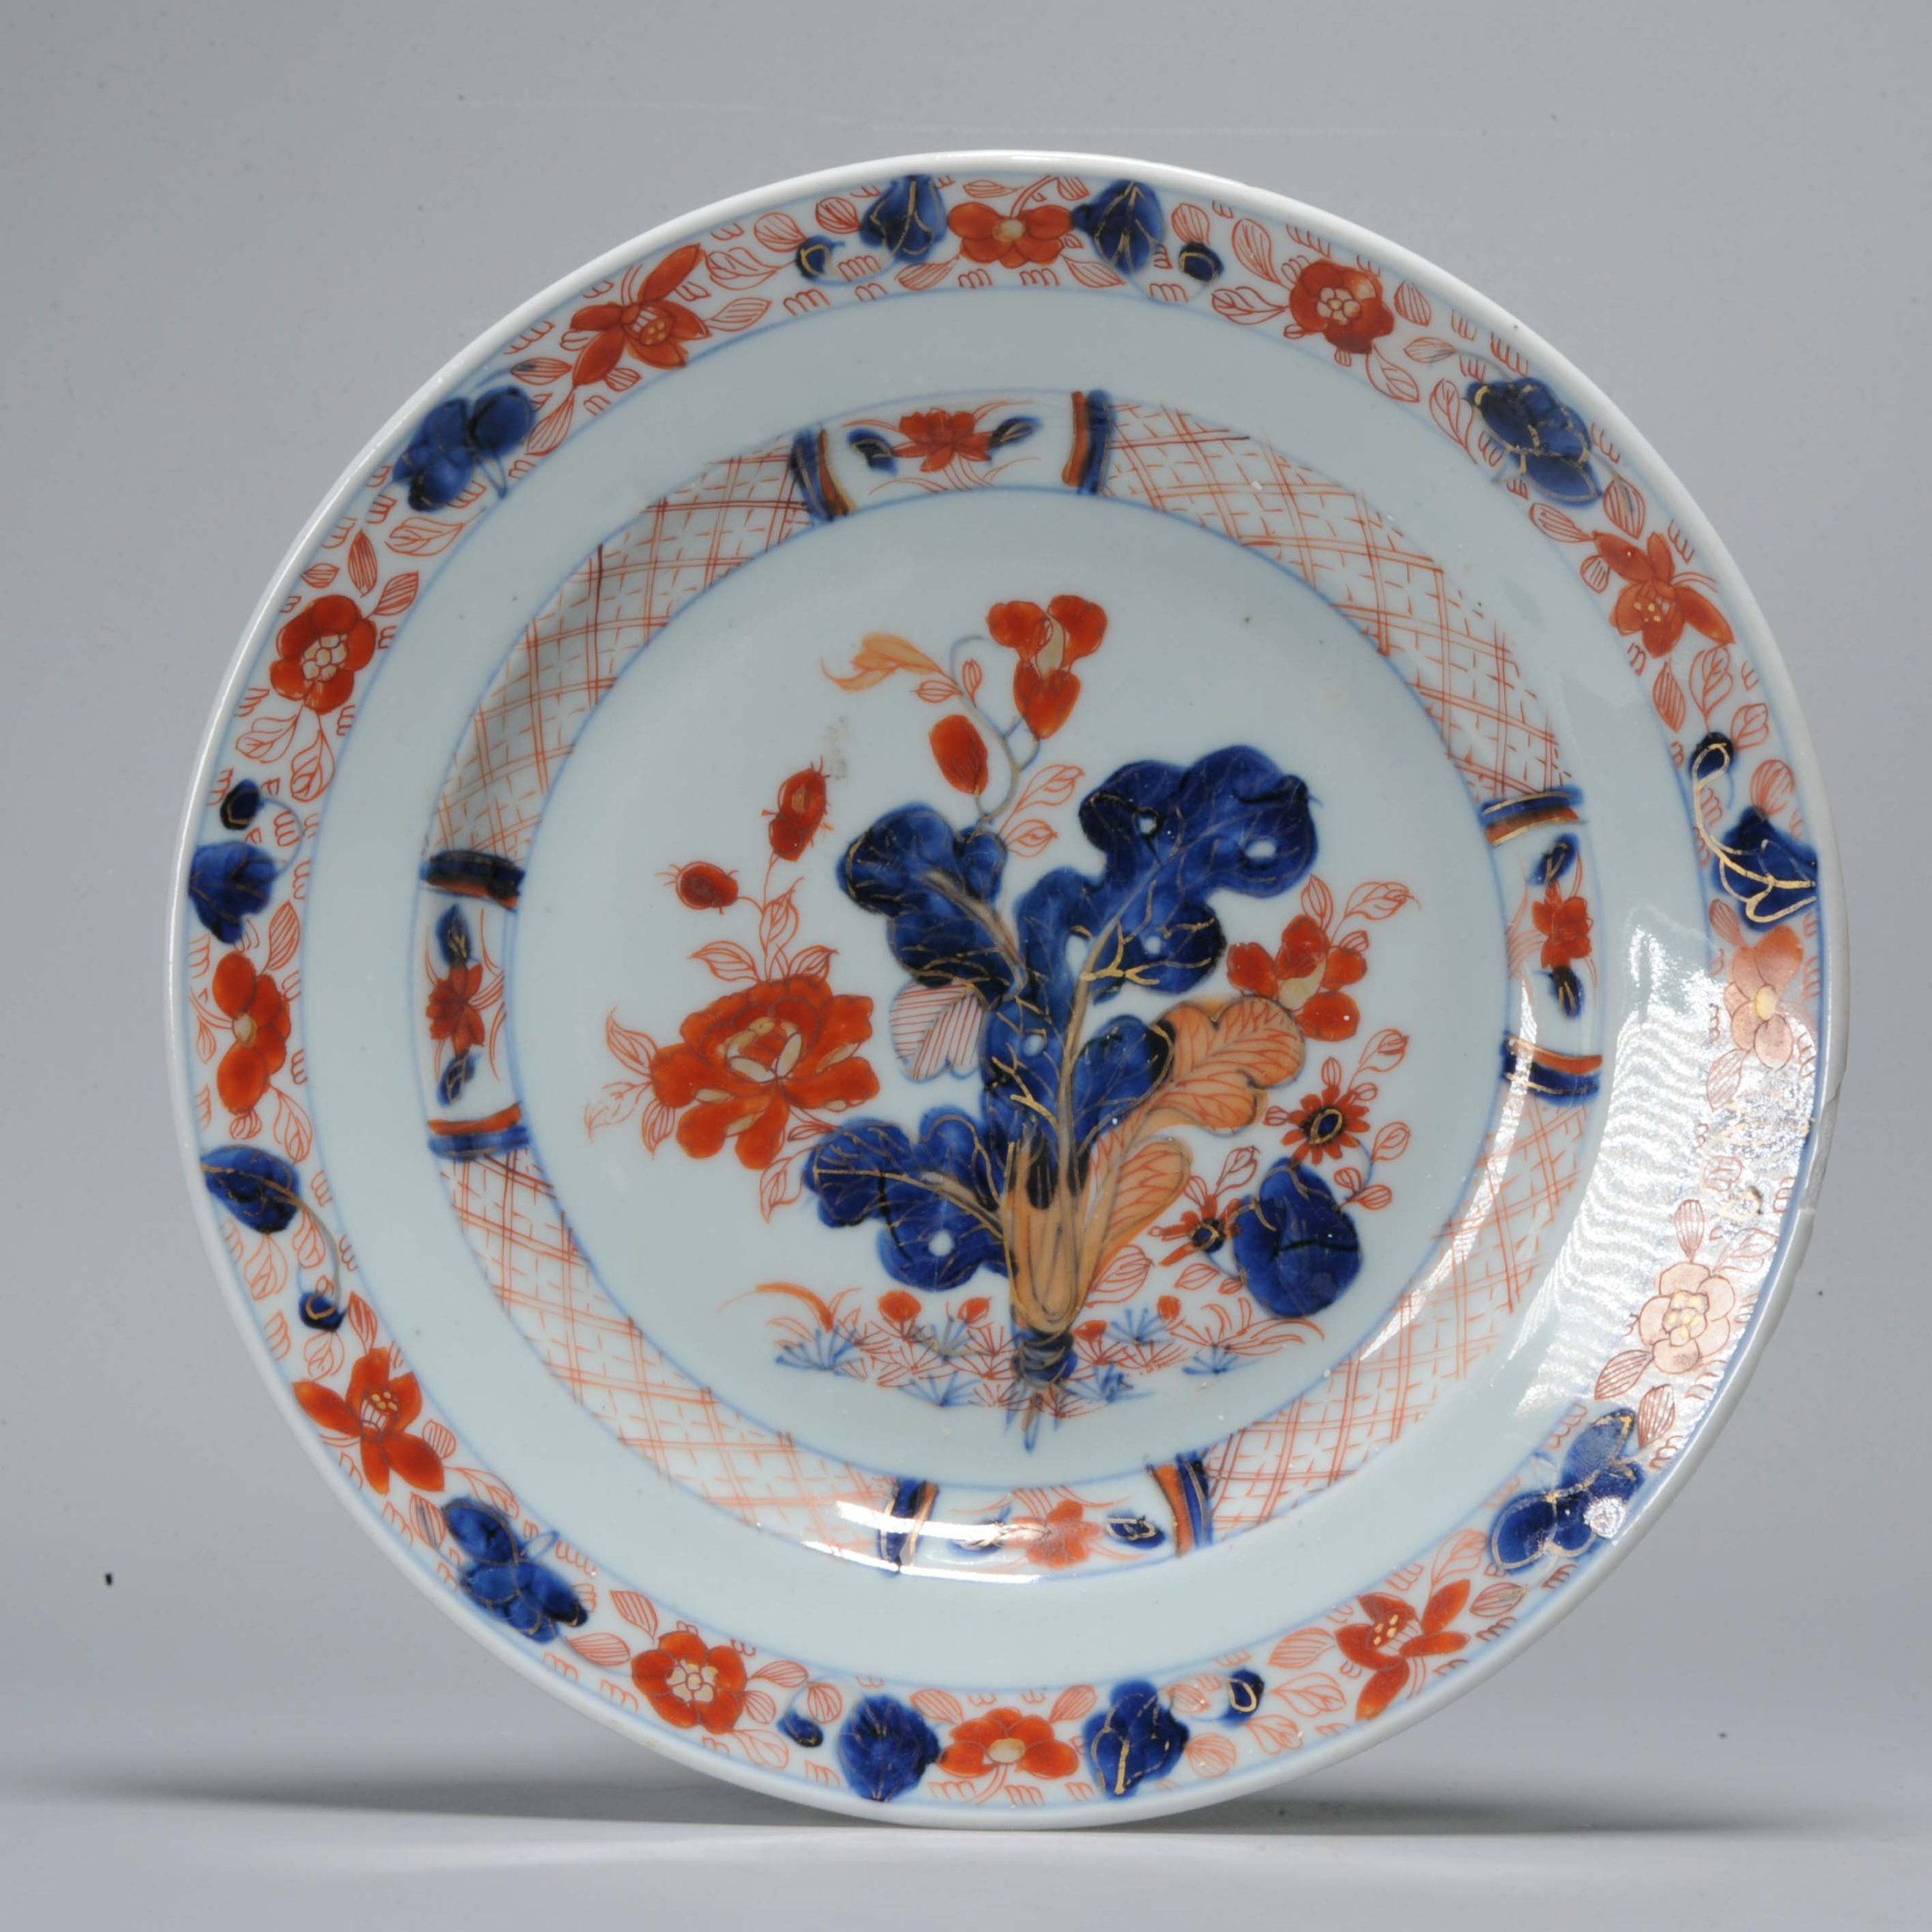 A Chinese Porcelain Kangxi period Imari Plate Dish Cabbage Leaf Flowers